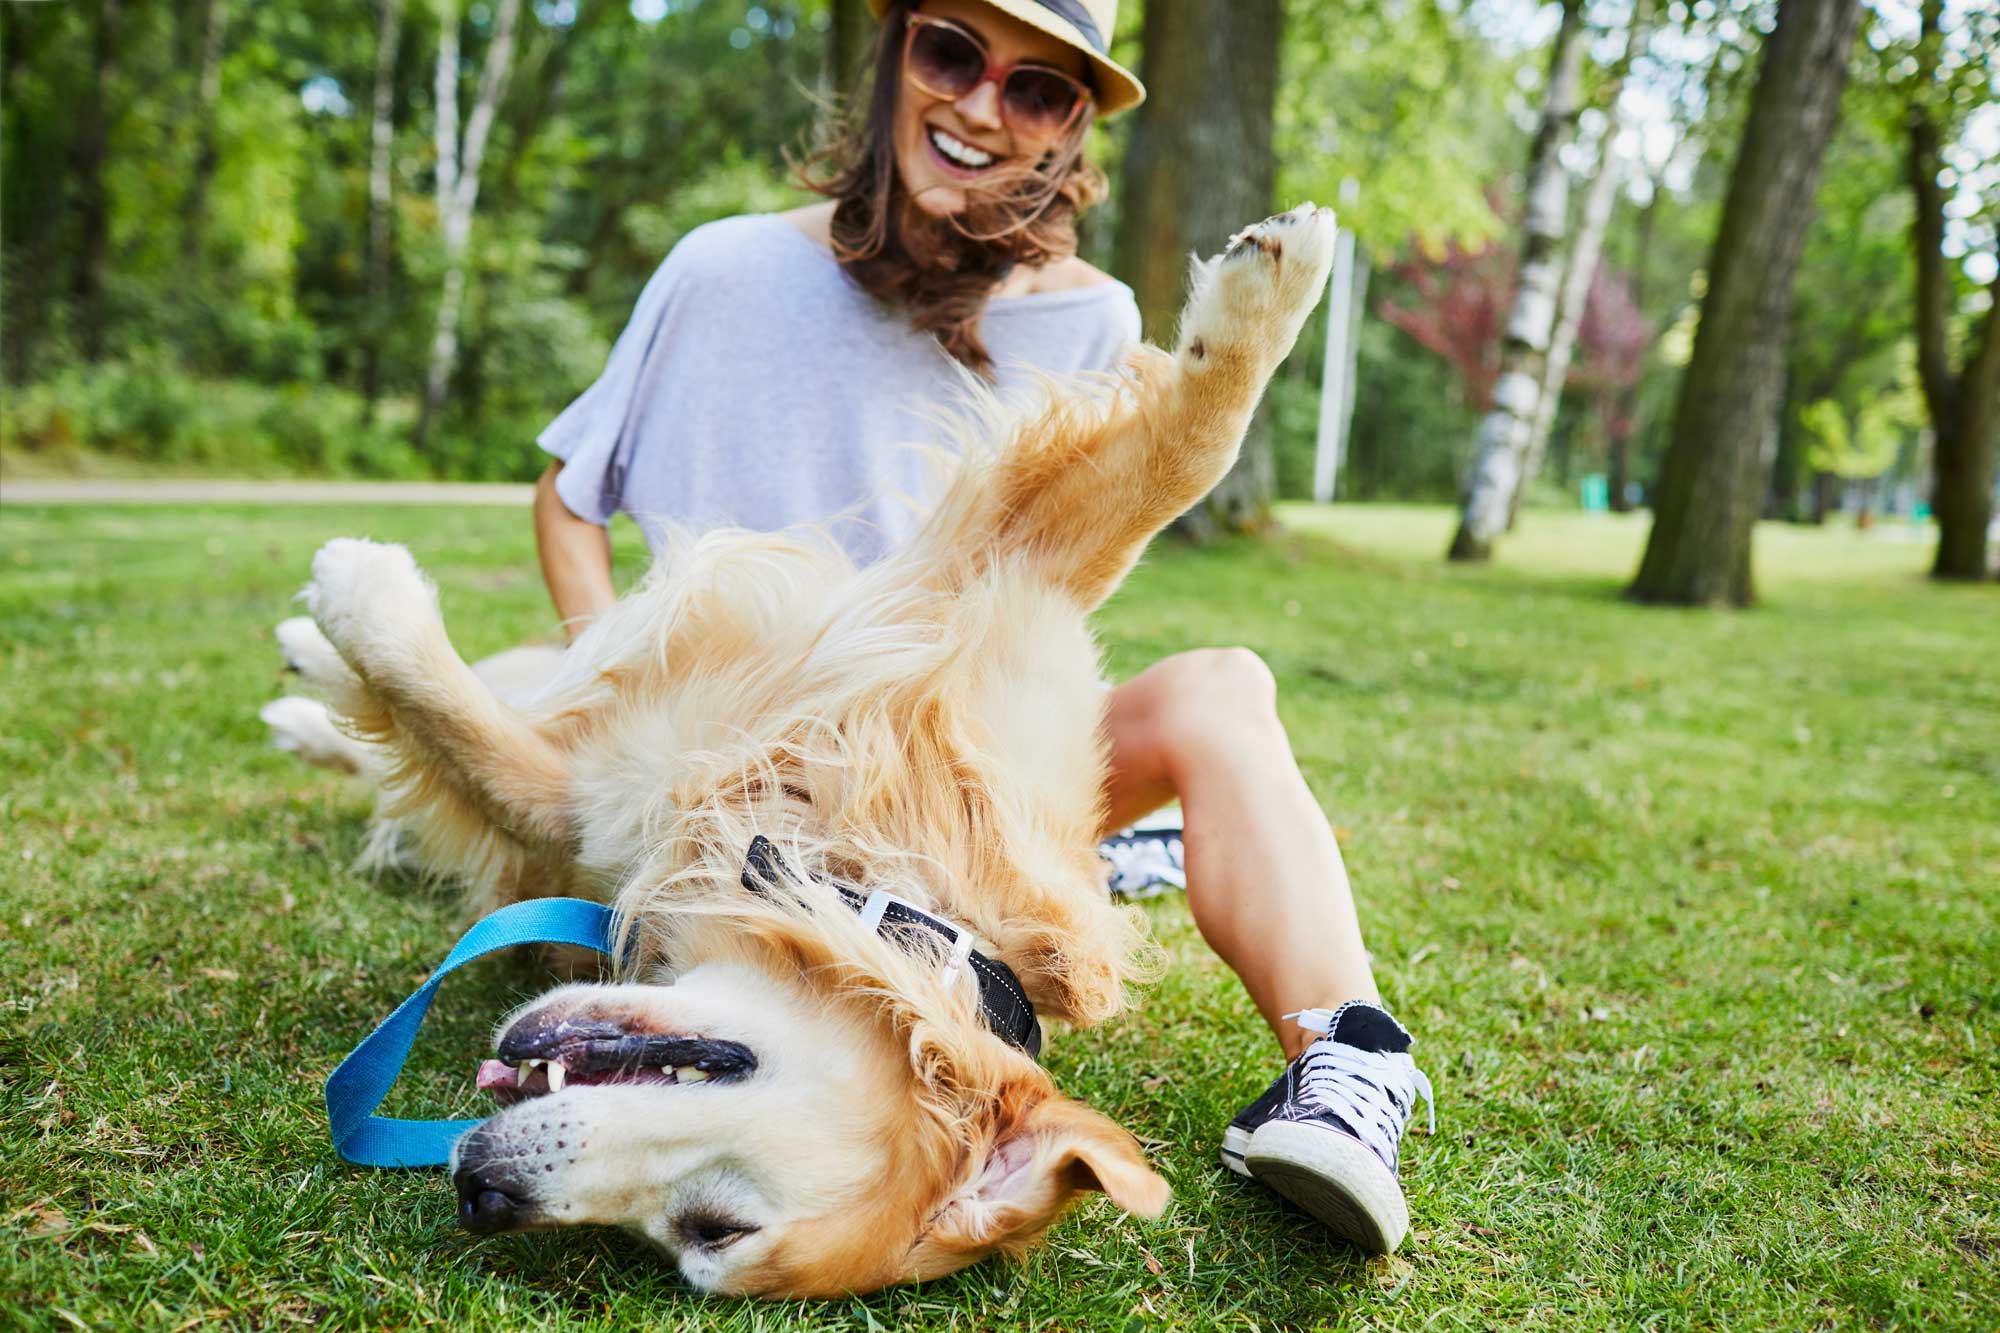 Are you and your faithful four-legged friend inseparable?